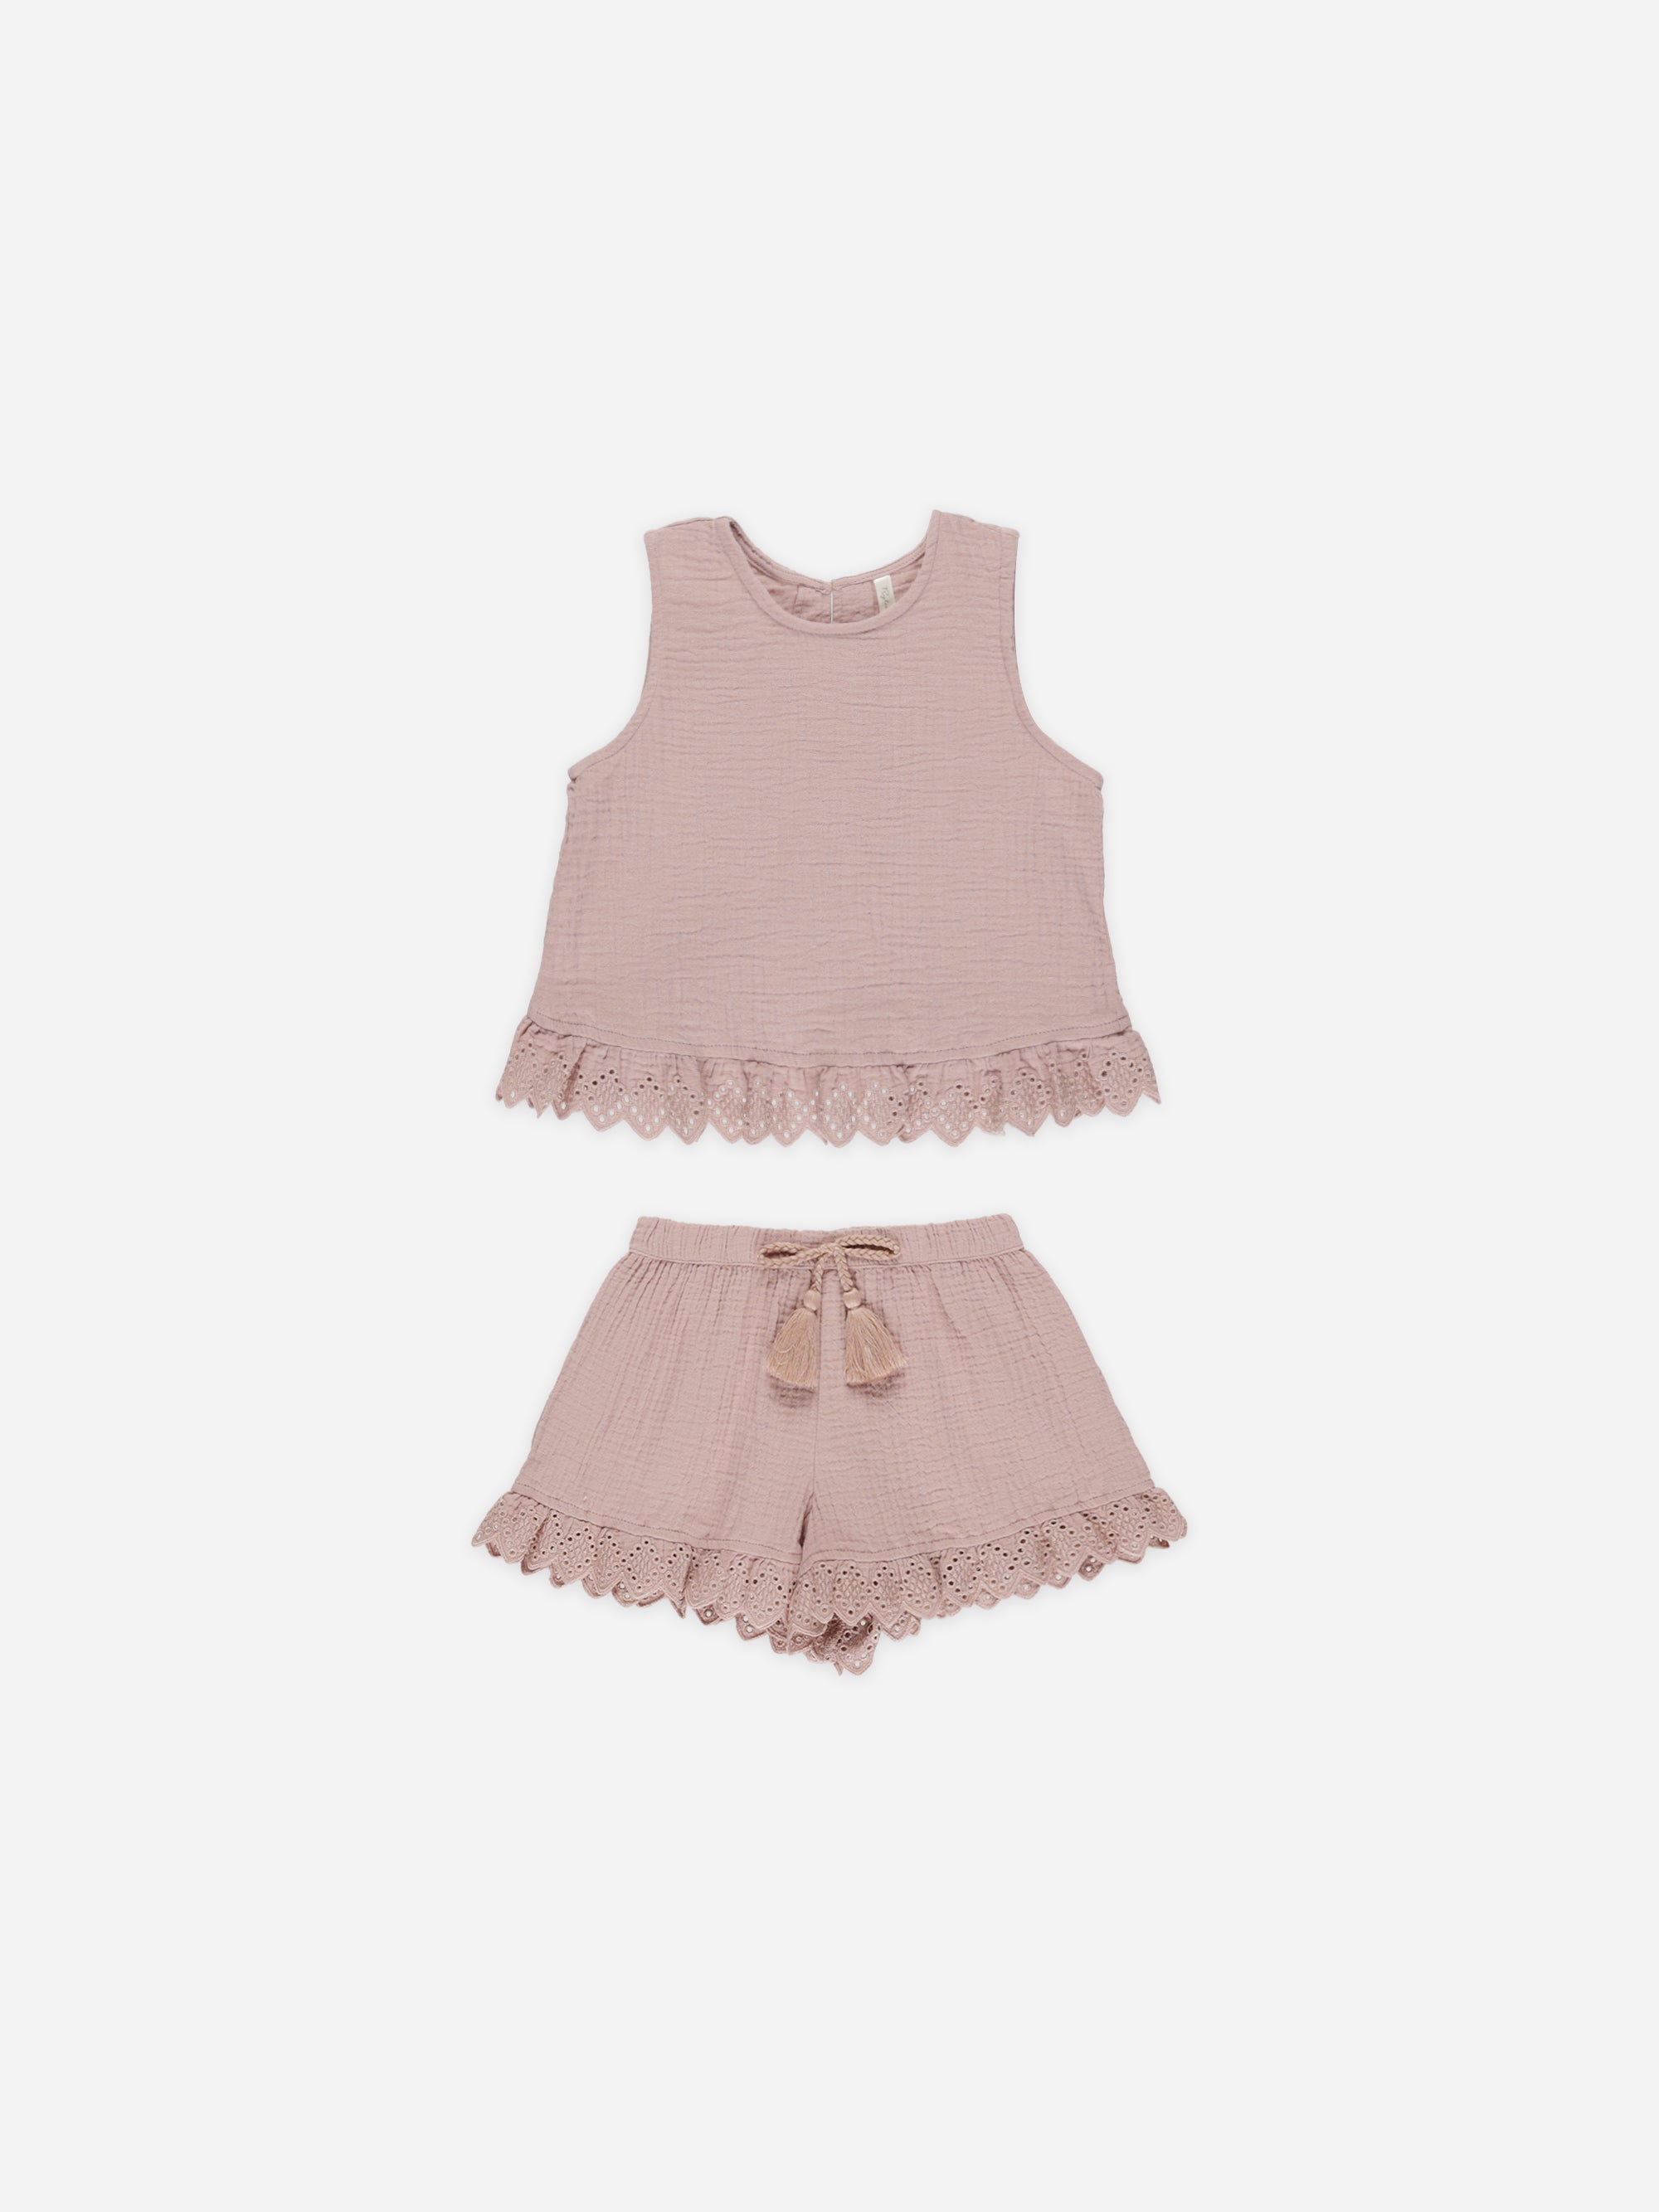 Leonie Set || Mauve - Rylee + Cru | Kids Clothes | Trendy Baby Clothes | Modern Infant Outfits |